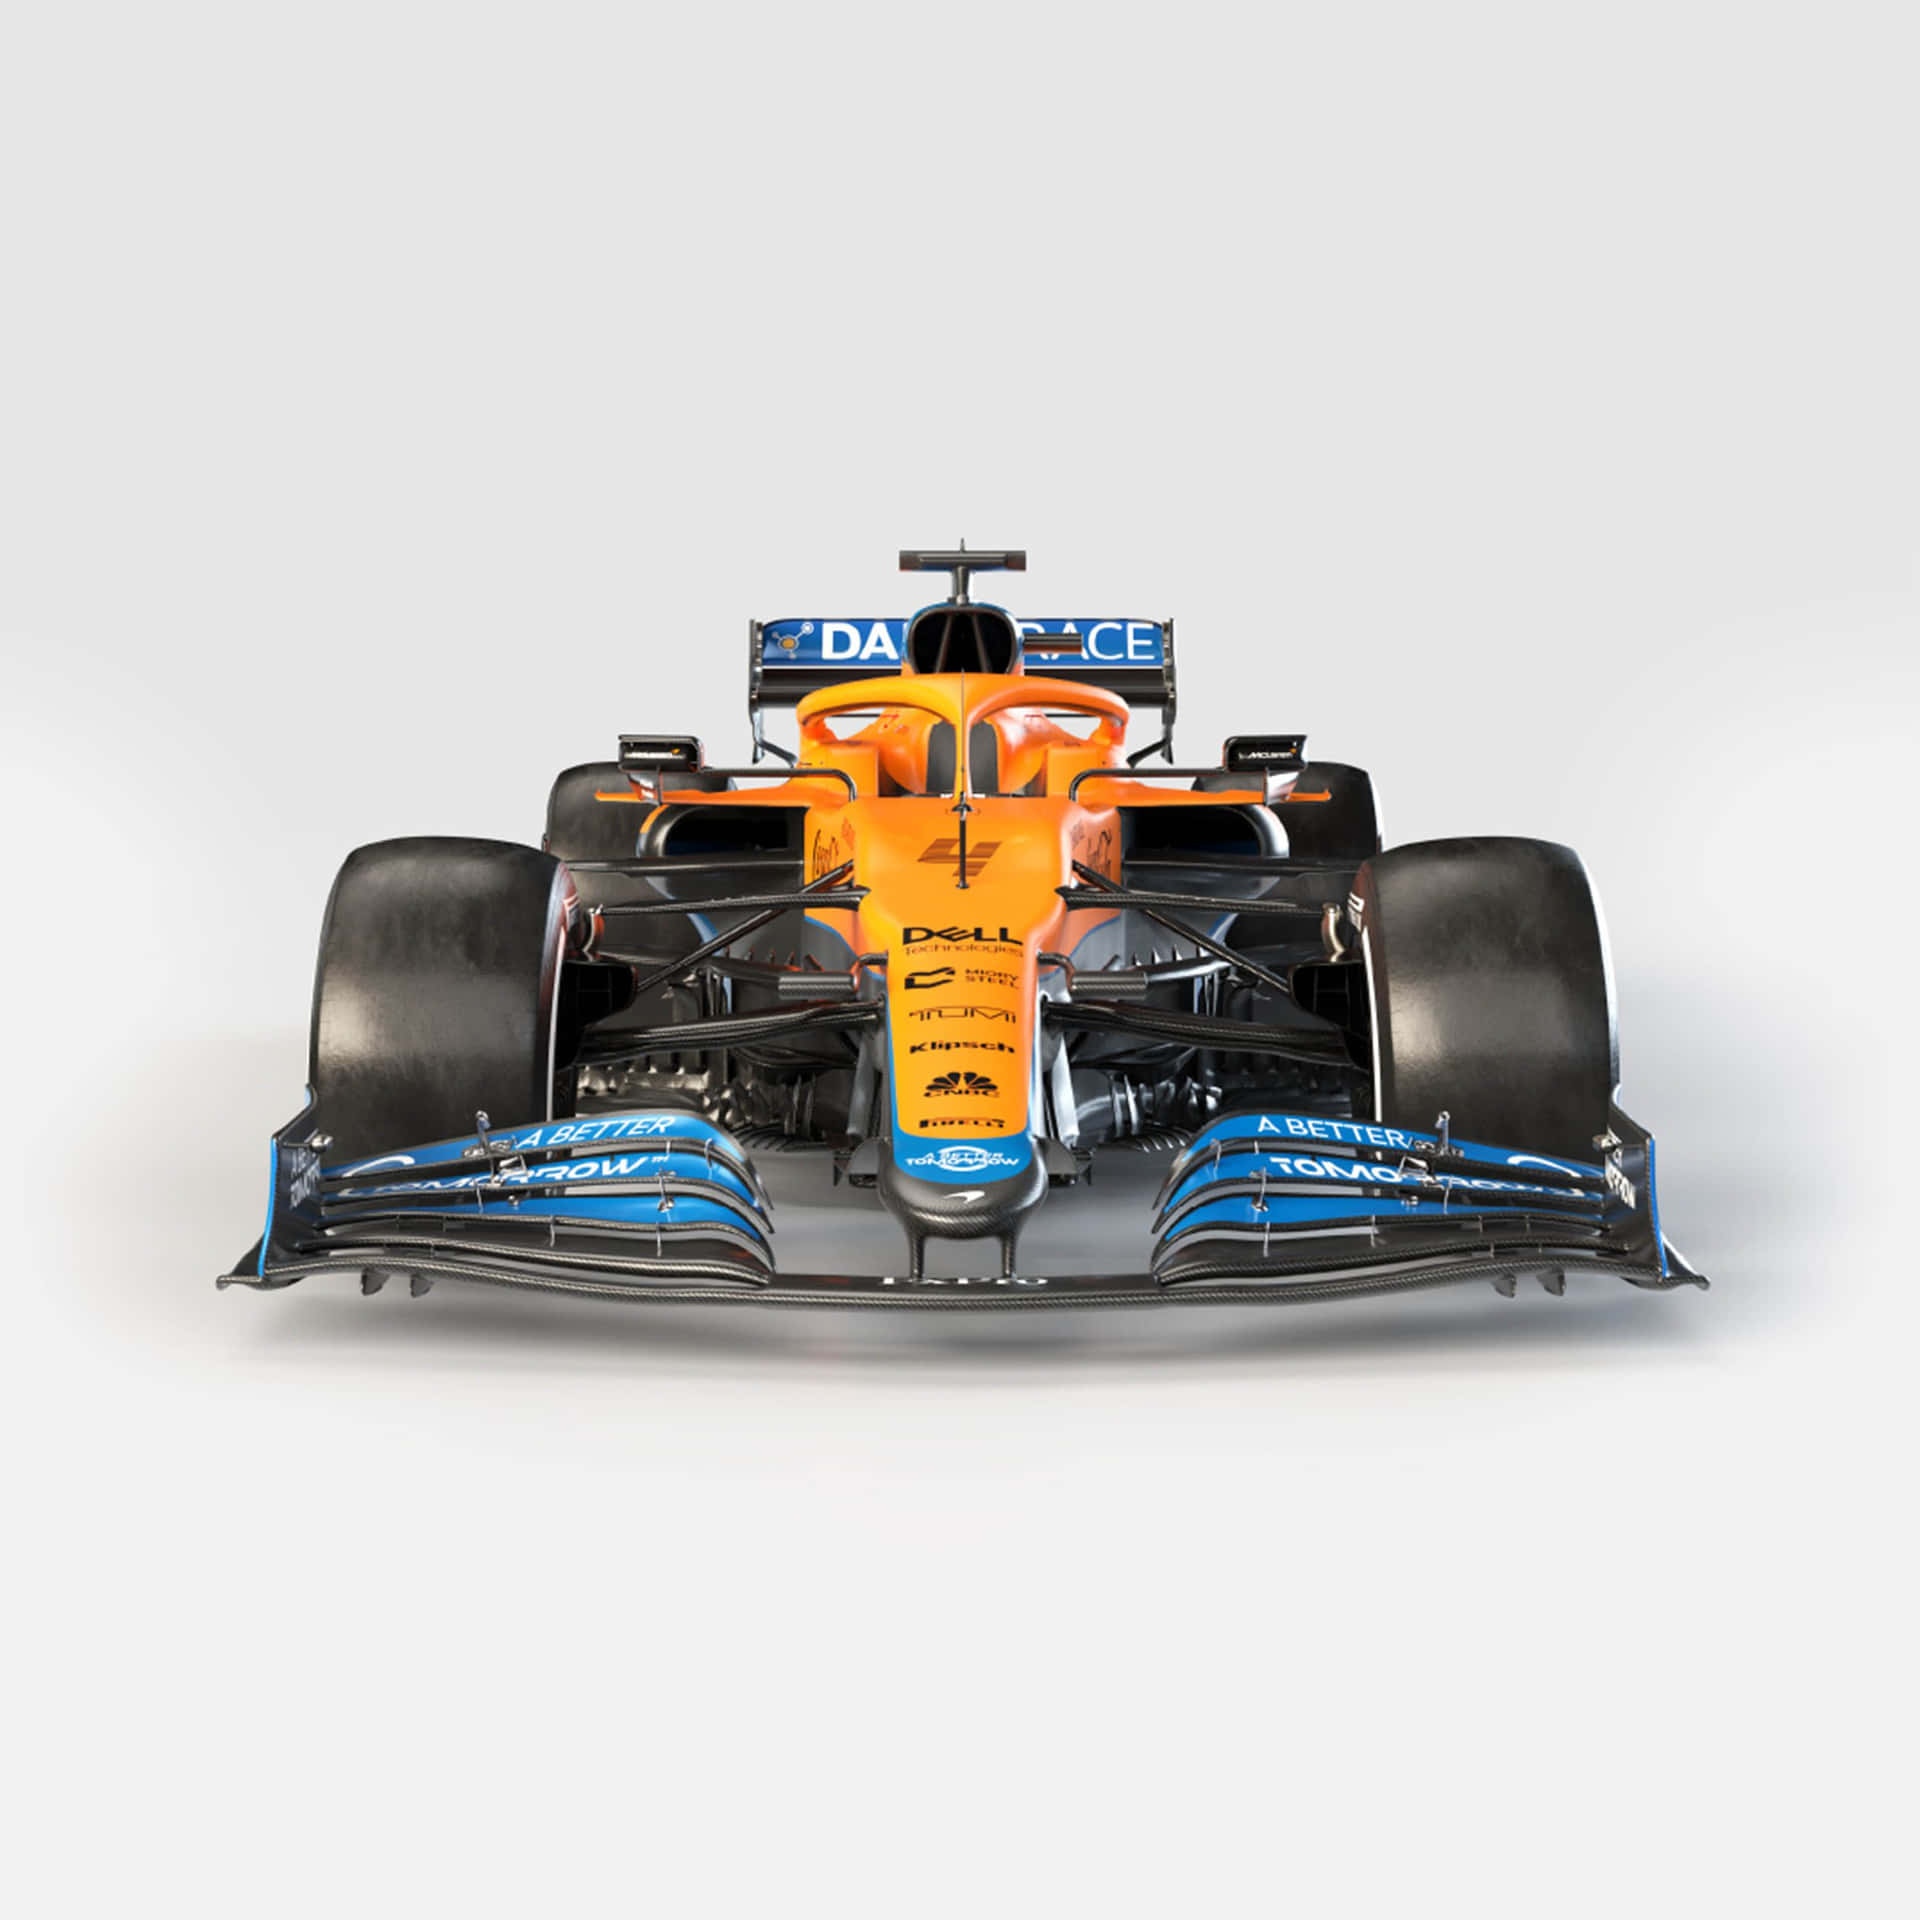 The energy and power of the Mclaren Formula 1 Team Wallpaper